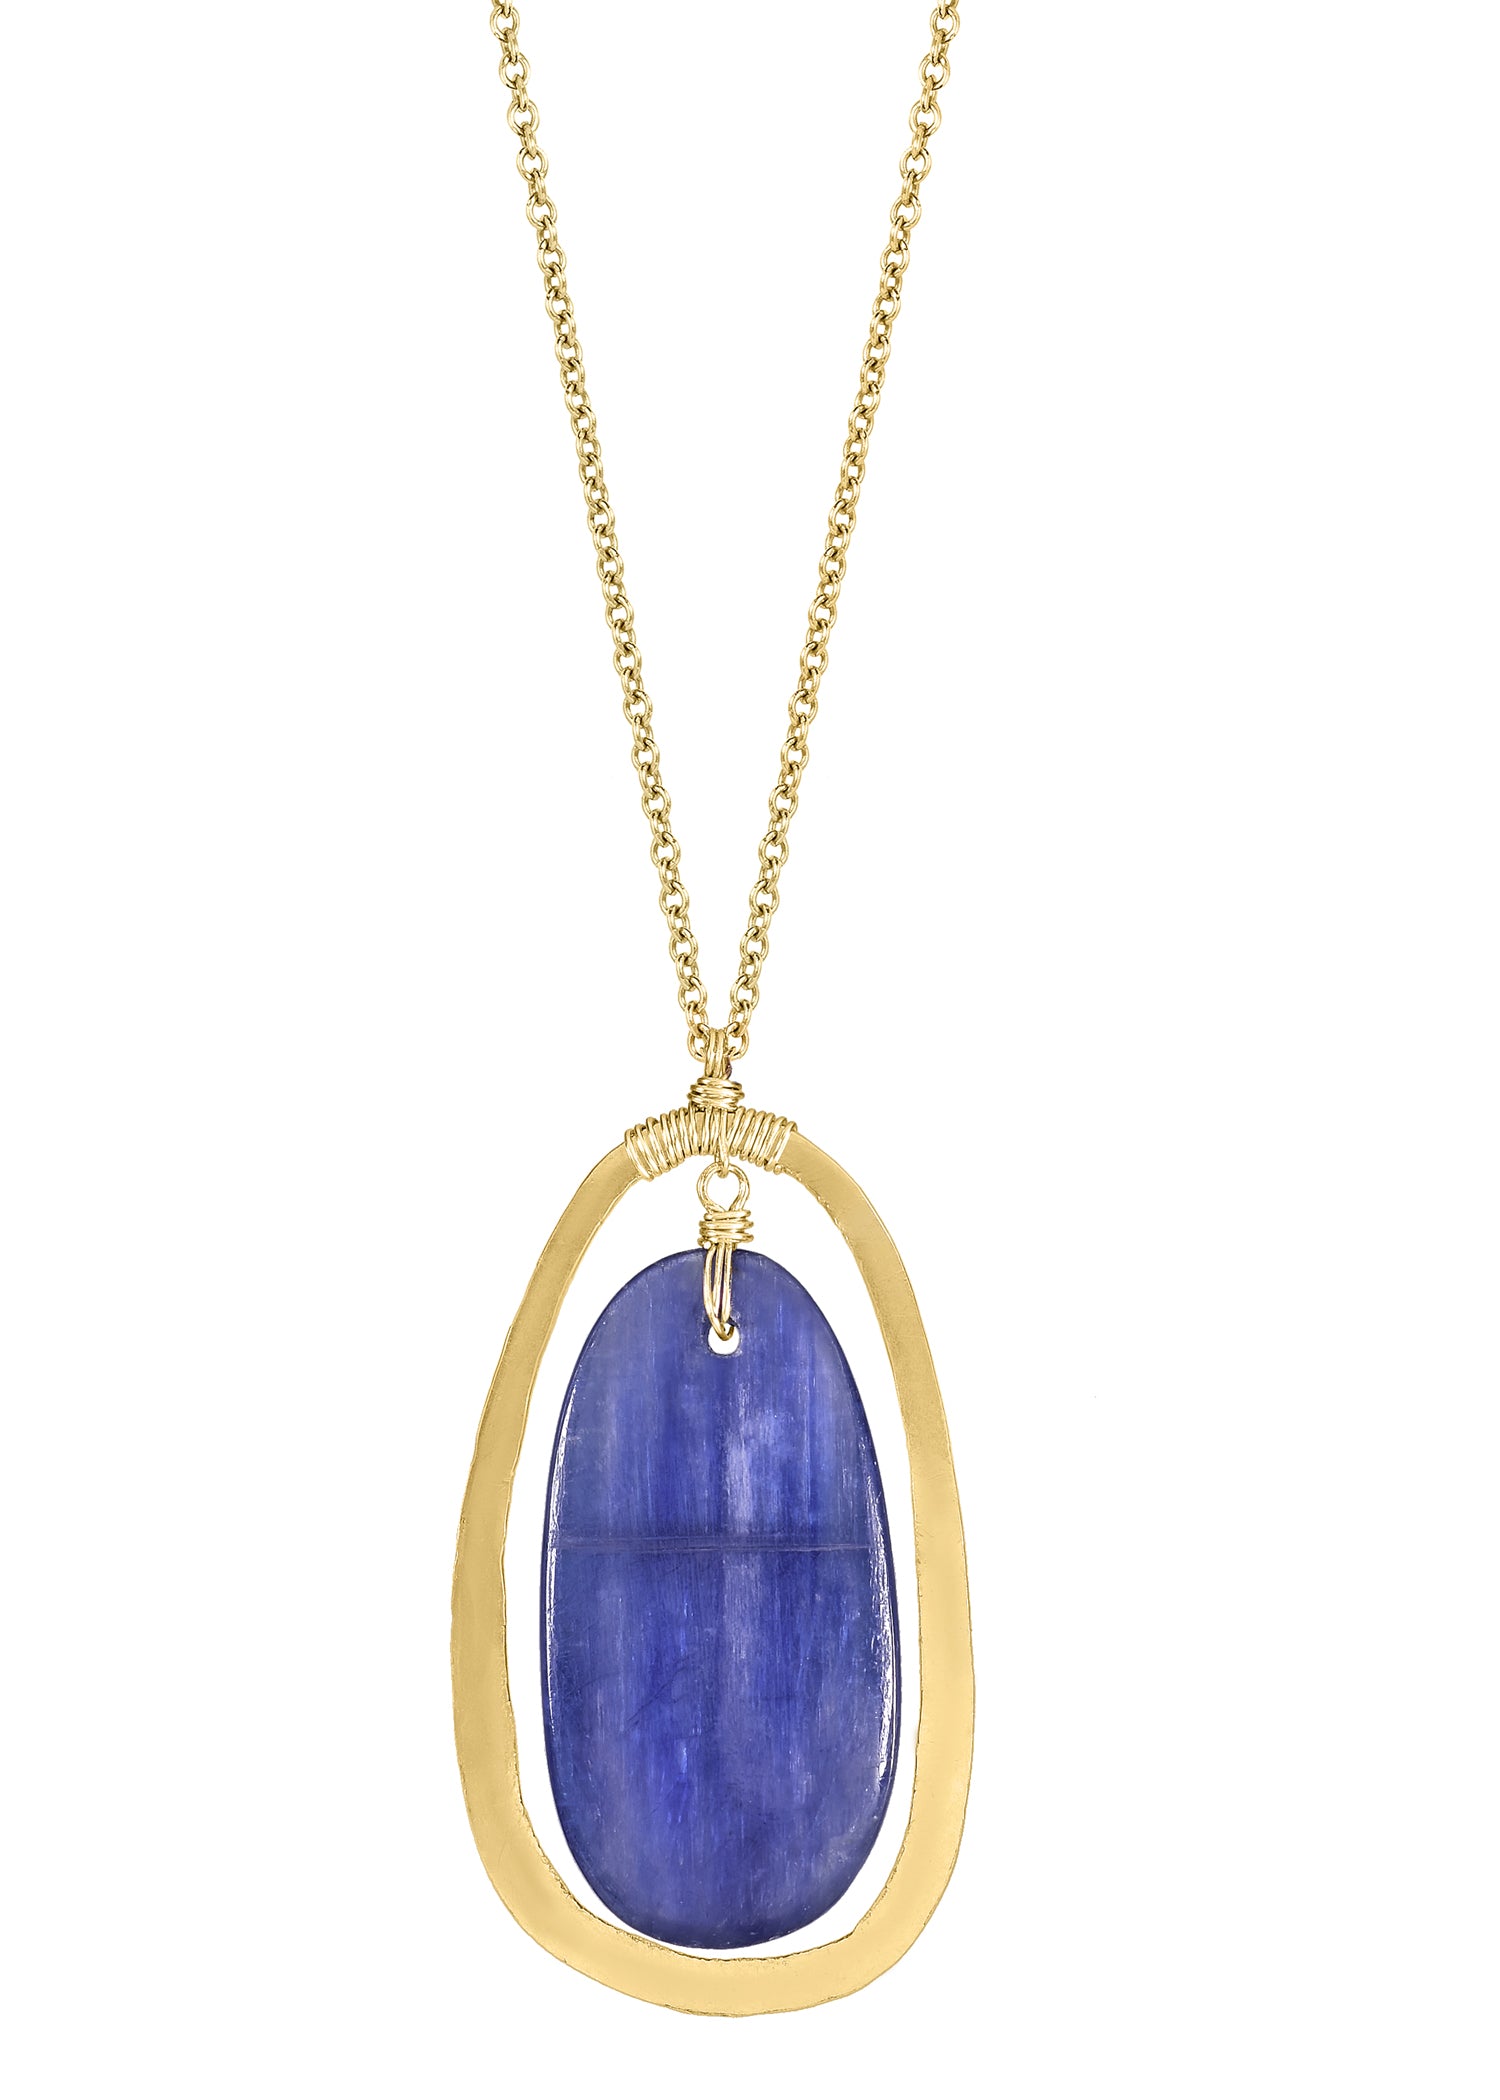 Kyanite 14k gold fill Necklace measures 28-1/4" in length Pendant measures 1-3/8" in length and 3/4" in width at the widest point Handmade in our Los Angeles studio